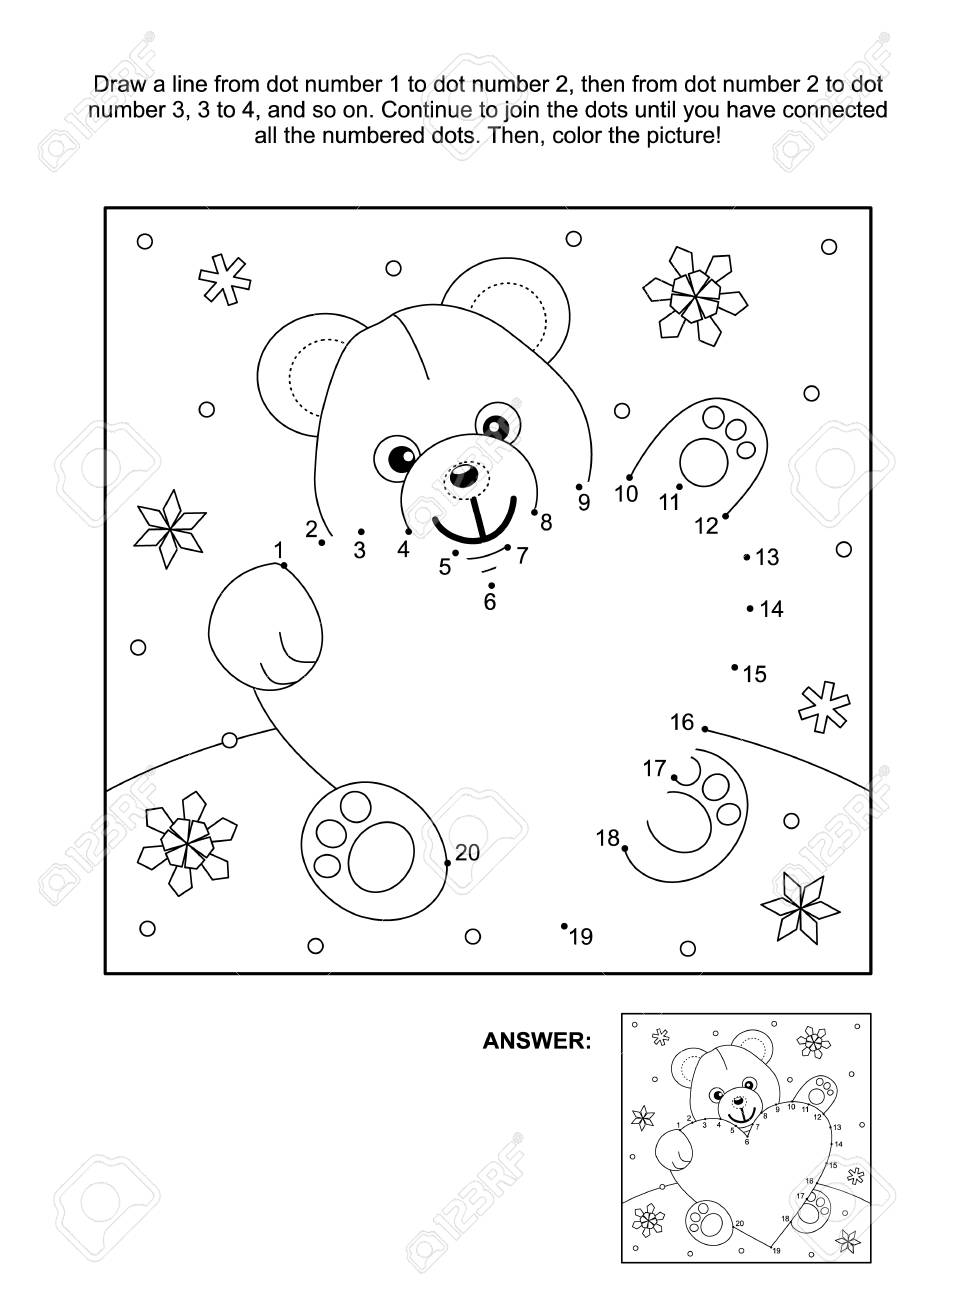 Valentines day themed connect the dots picture puzzle and coloring page with teddy bear and heart answer included royalty free svg cliparts vectors and stock illustration image